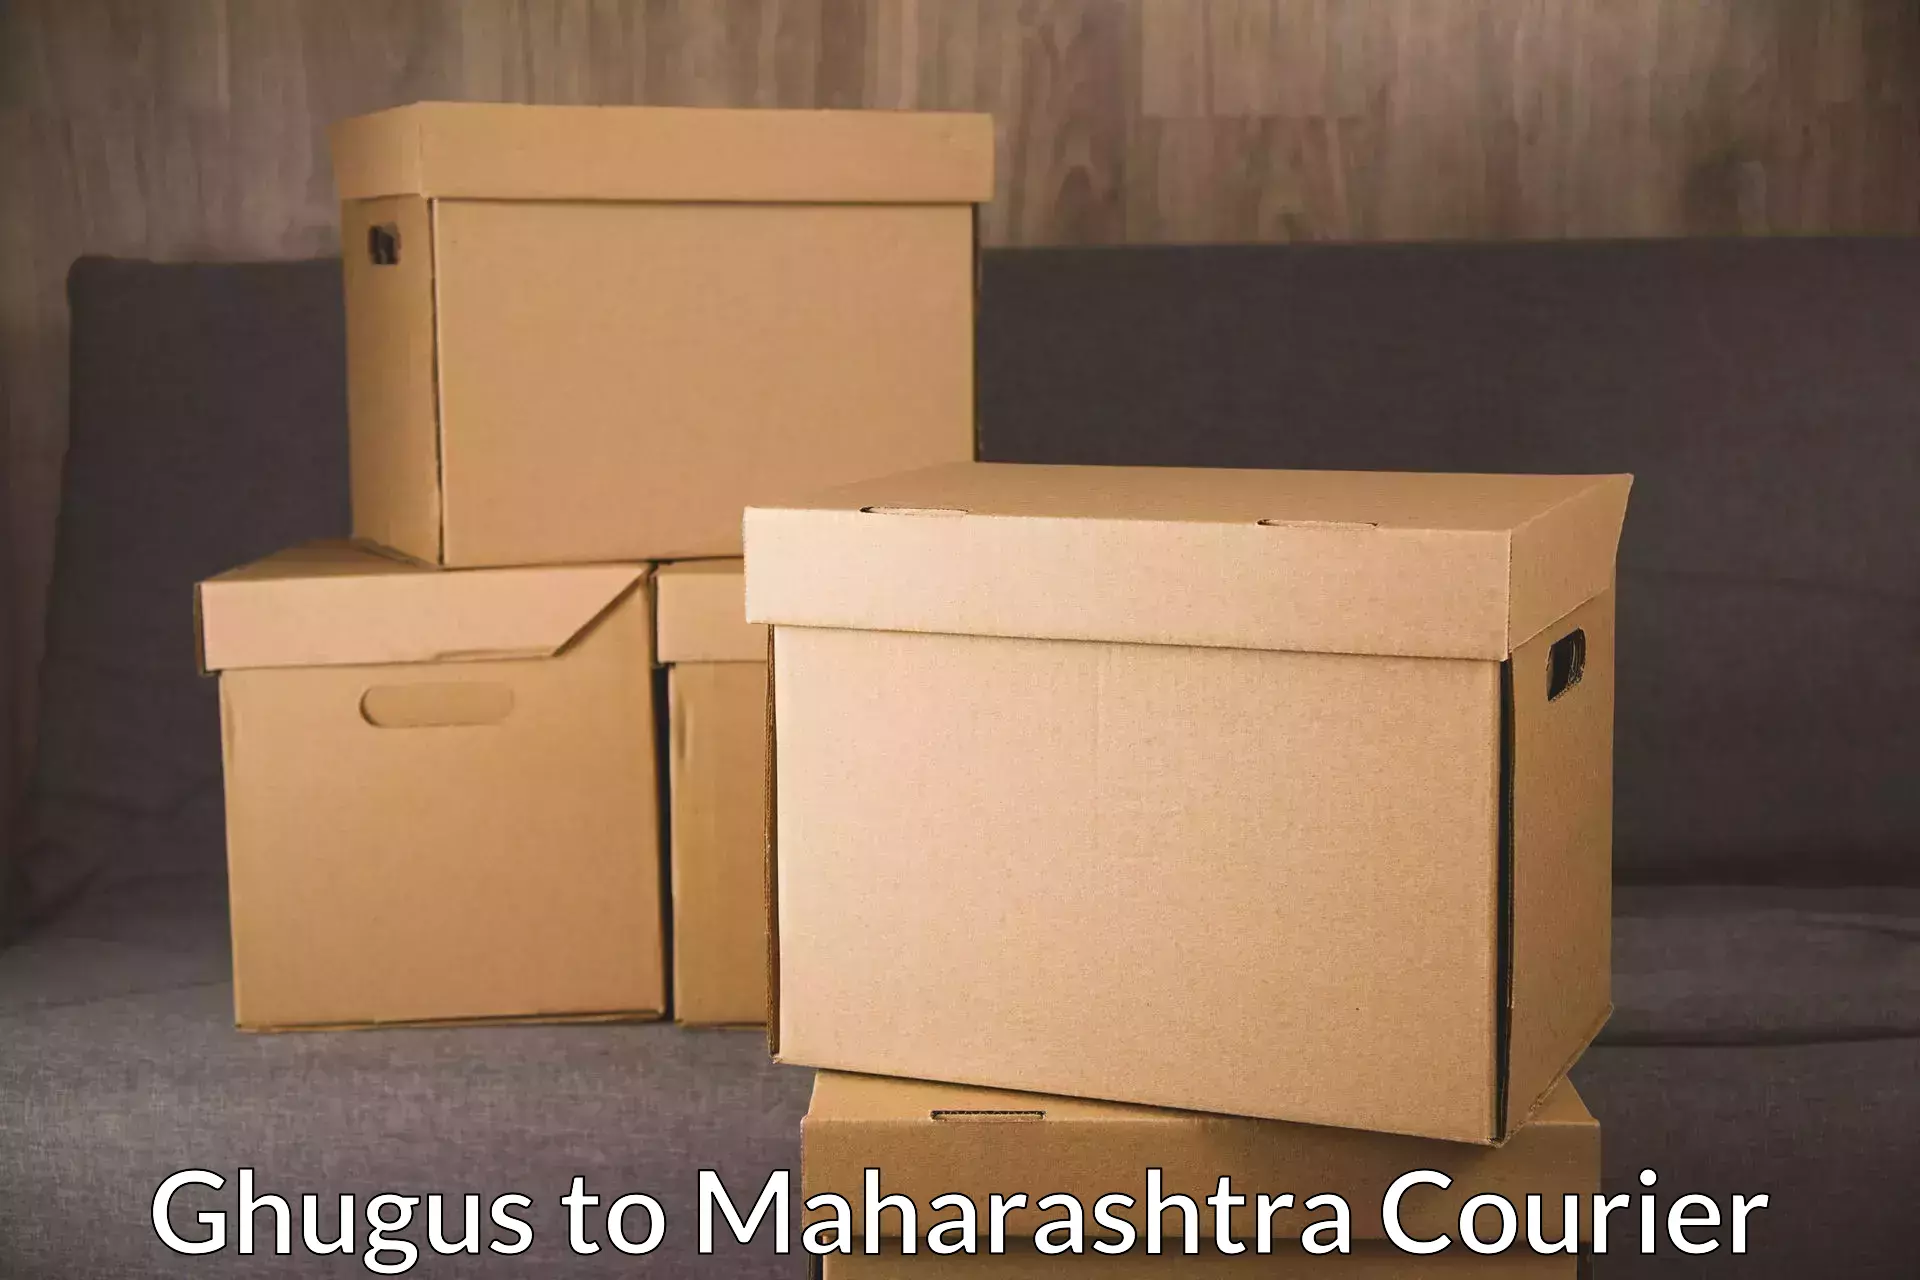 Same-day delivery options Ghugus to Maharashtra